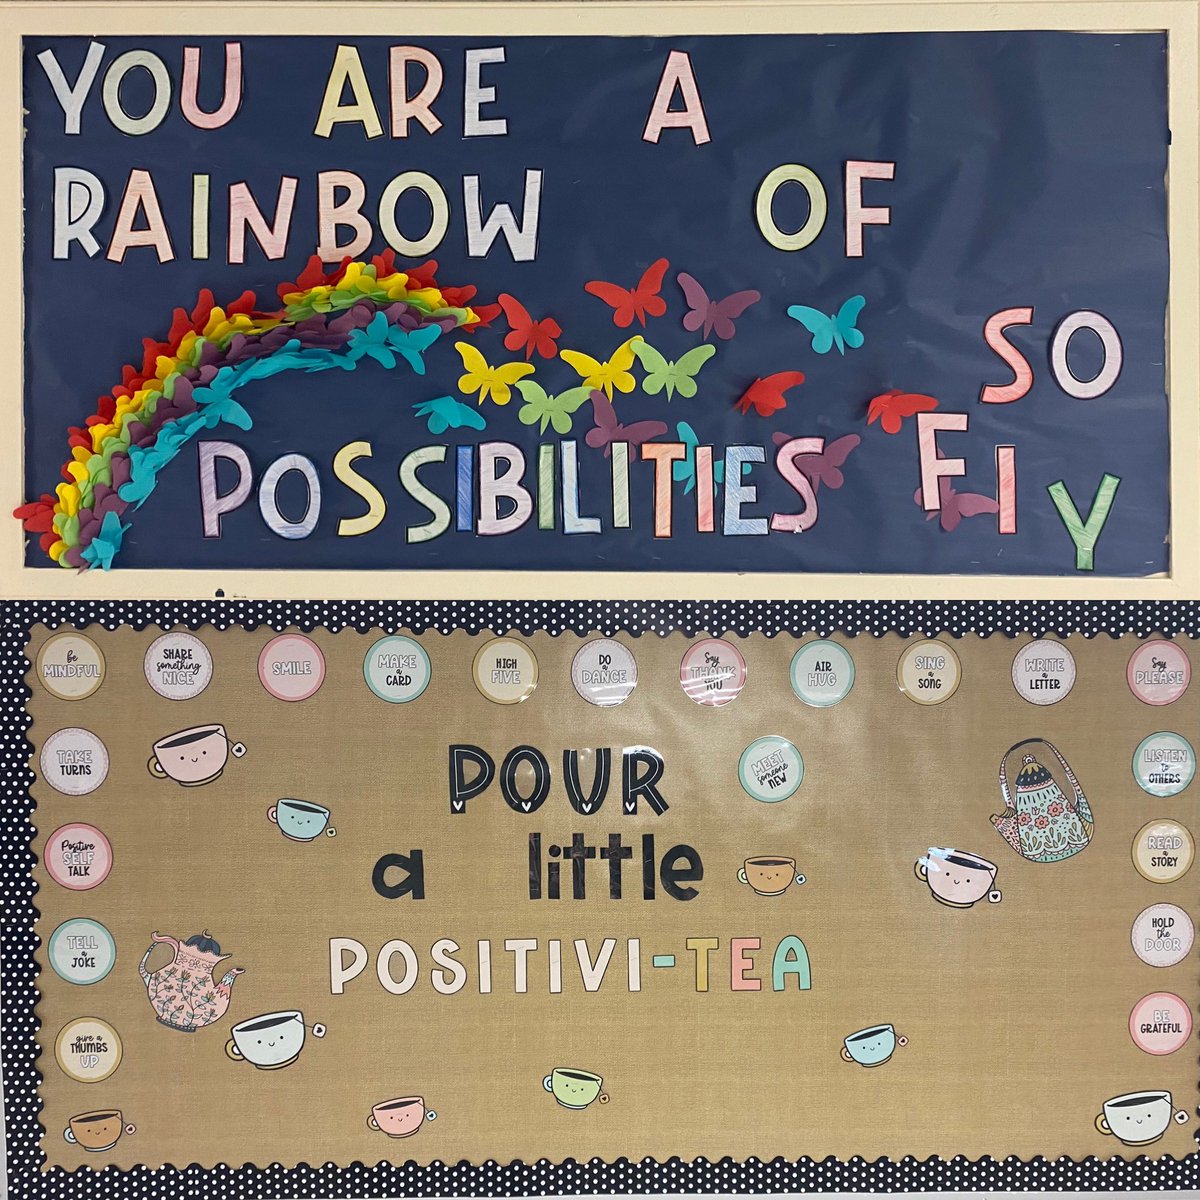 As you walk down the main hallway you can’t help but think positively! Everywhere you look there are positive affirmations @ECISD_AVID4ALL @ConsciousD @ECISDSEL